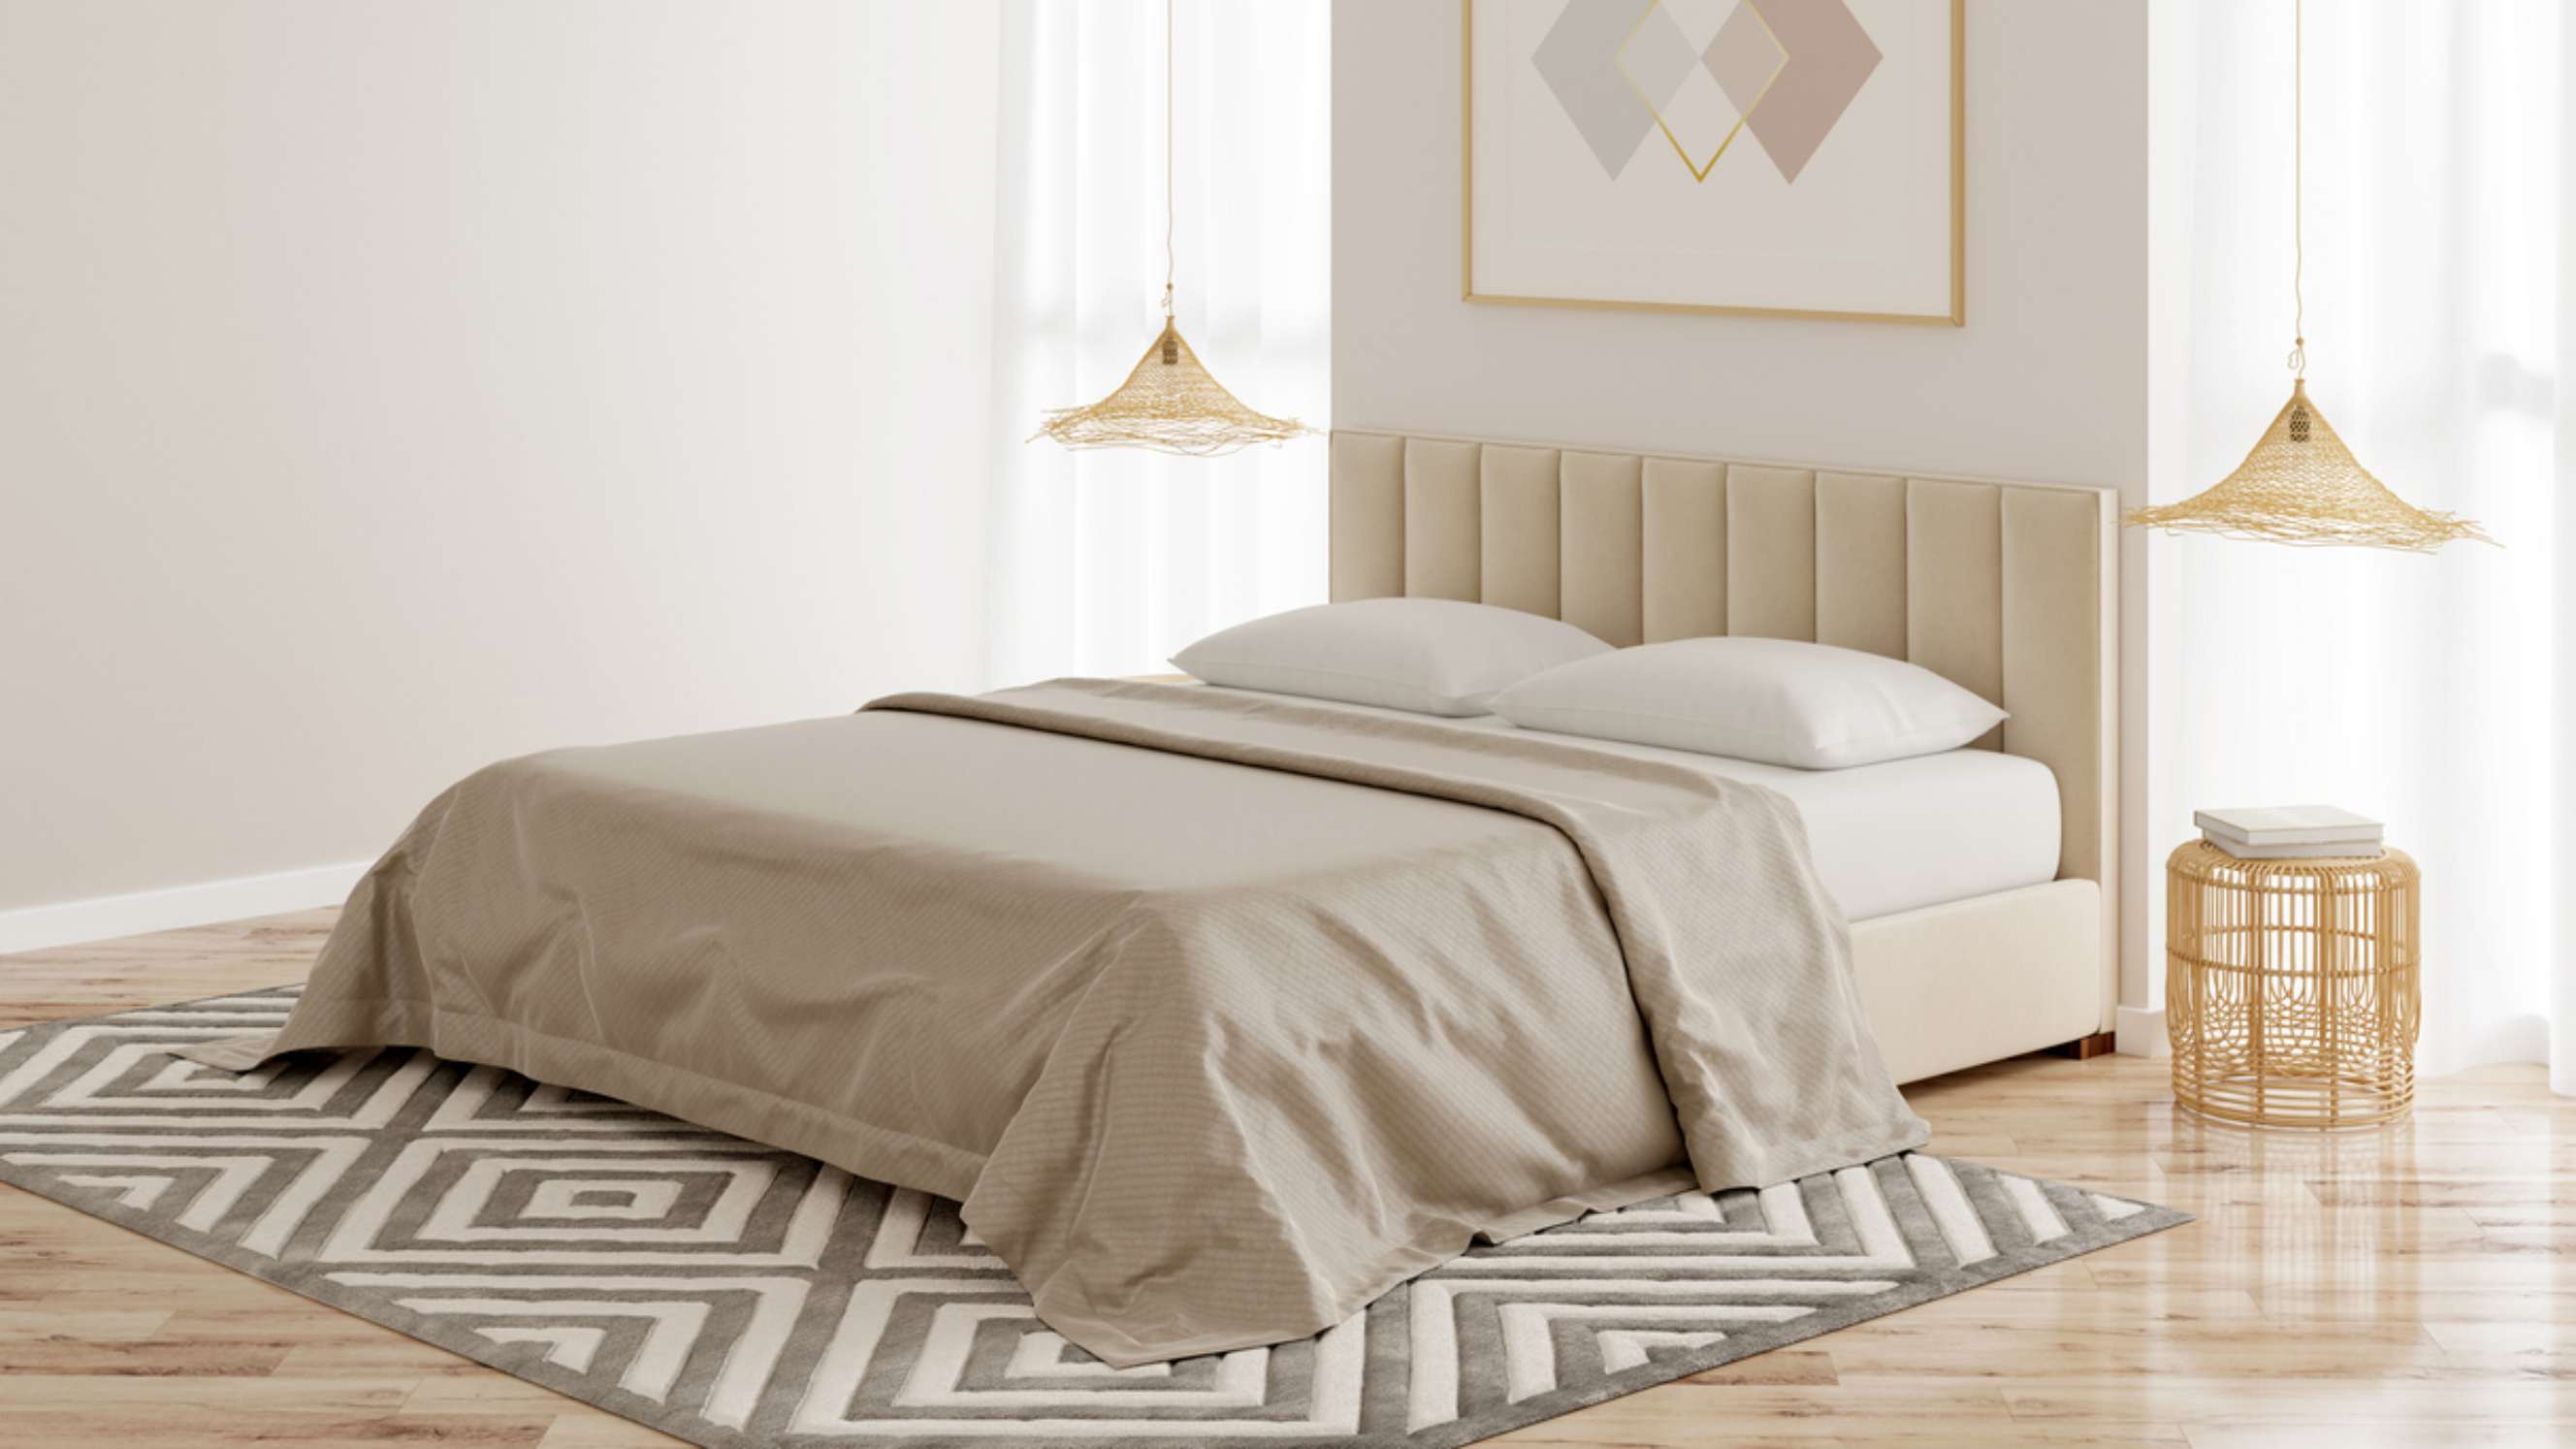 Double bed vs queen bed vs king bed - Interior of a beige bedroom with a bed